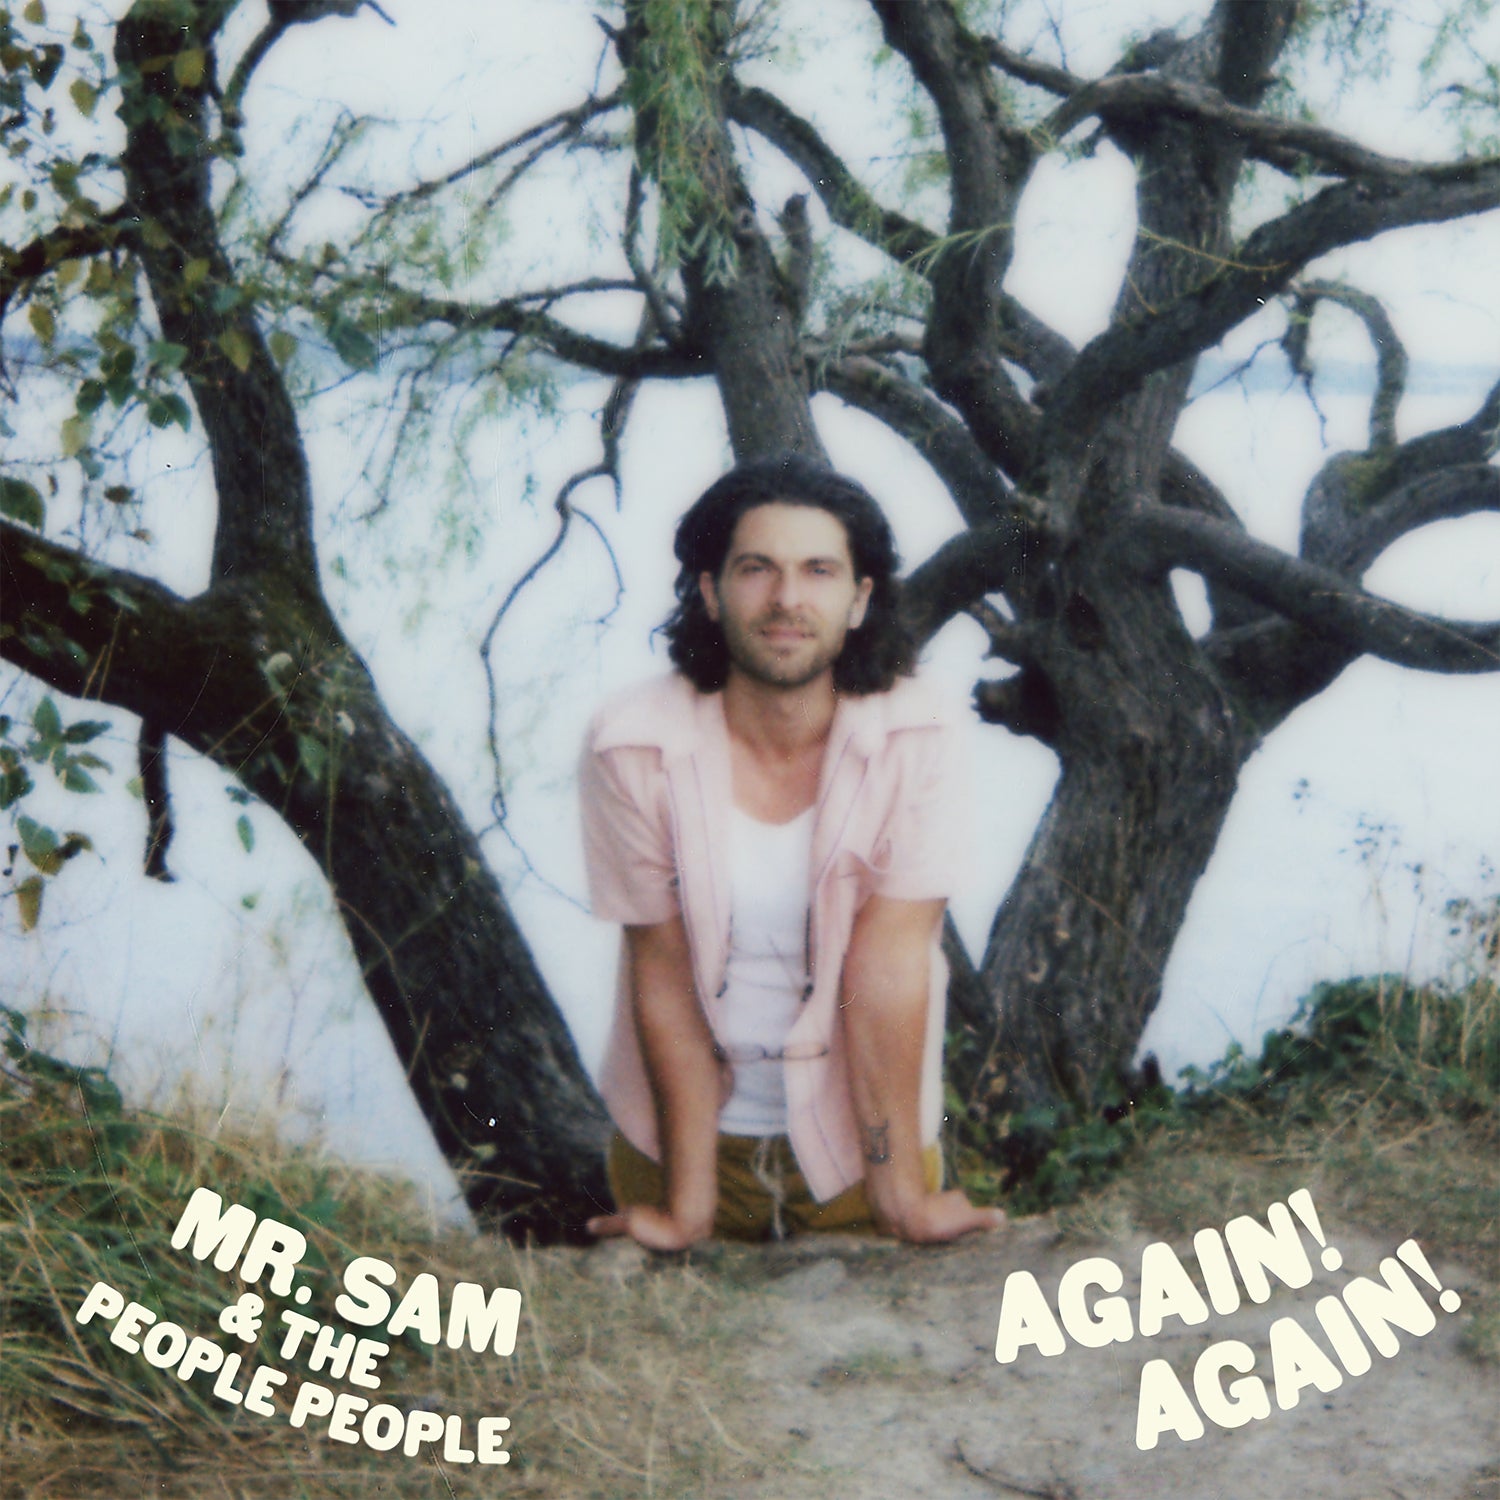 Mr. Sam and the People People - "Again! Again!" Digital Download